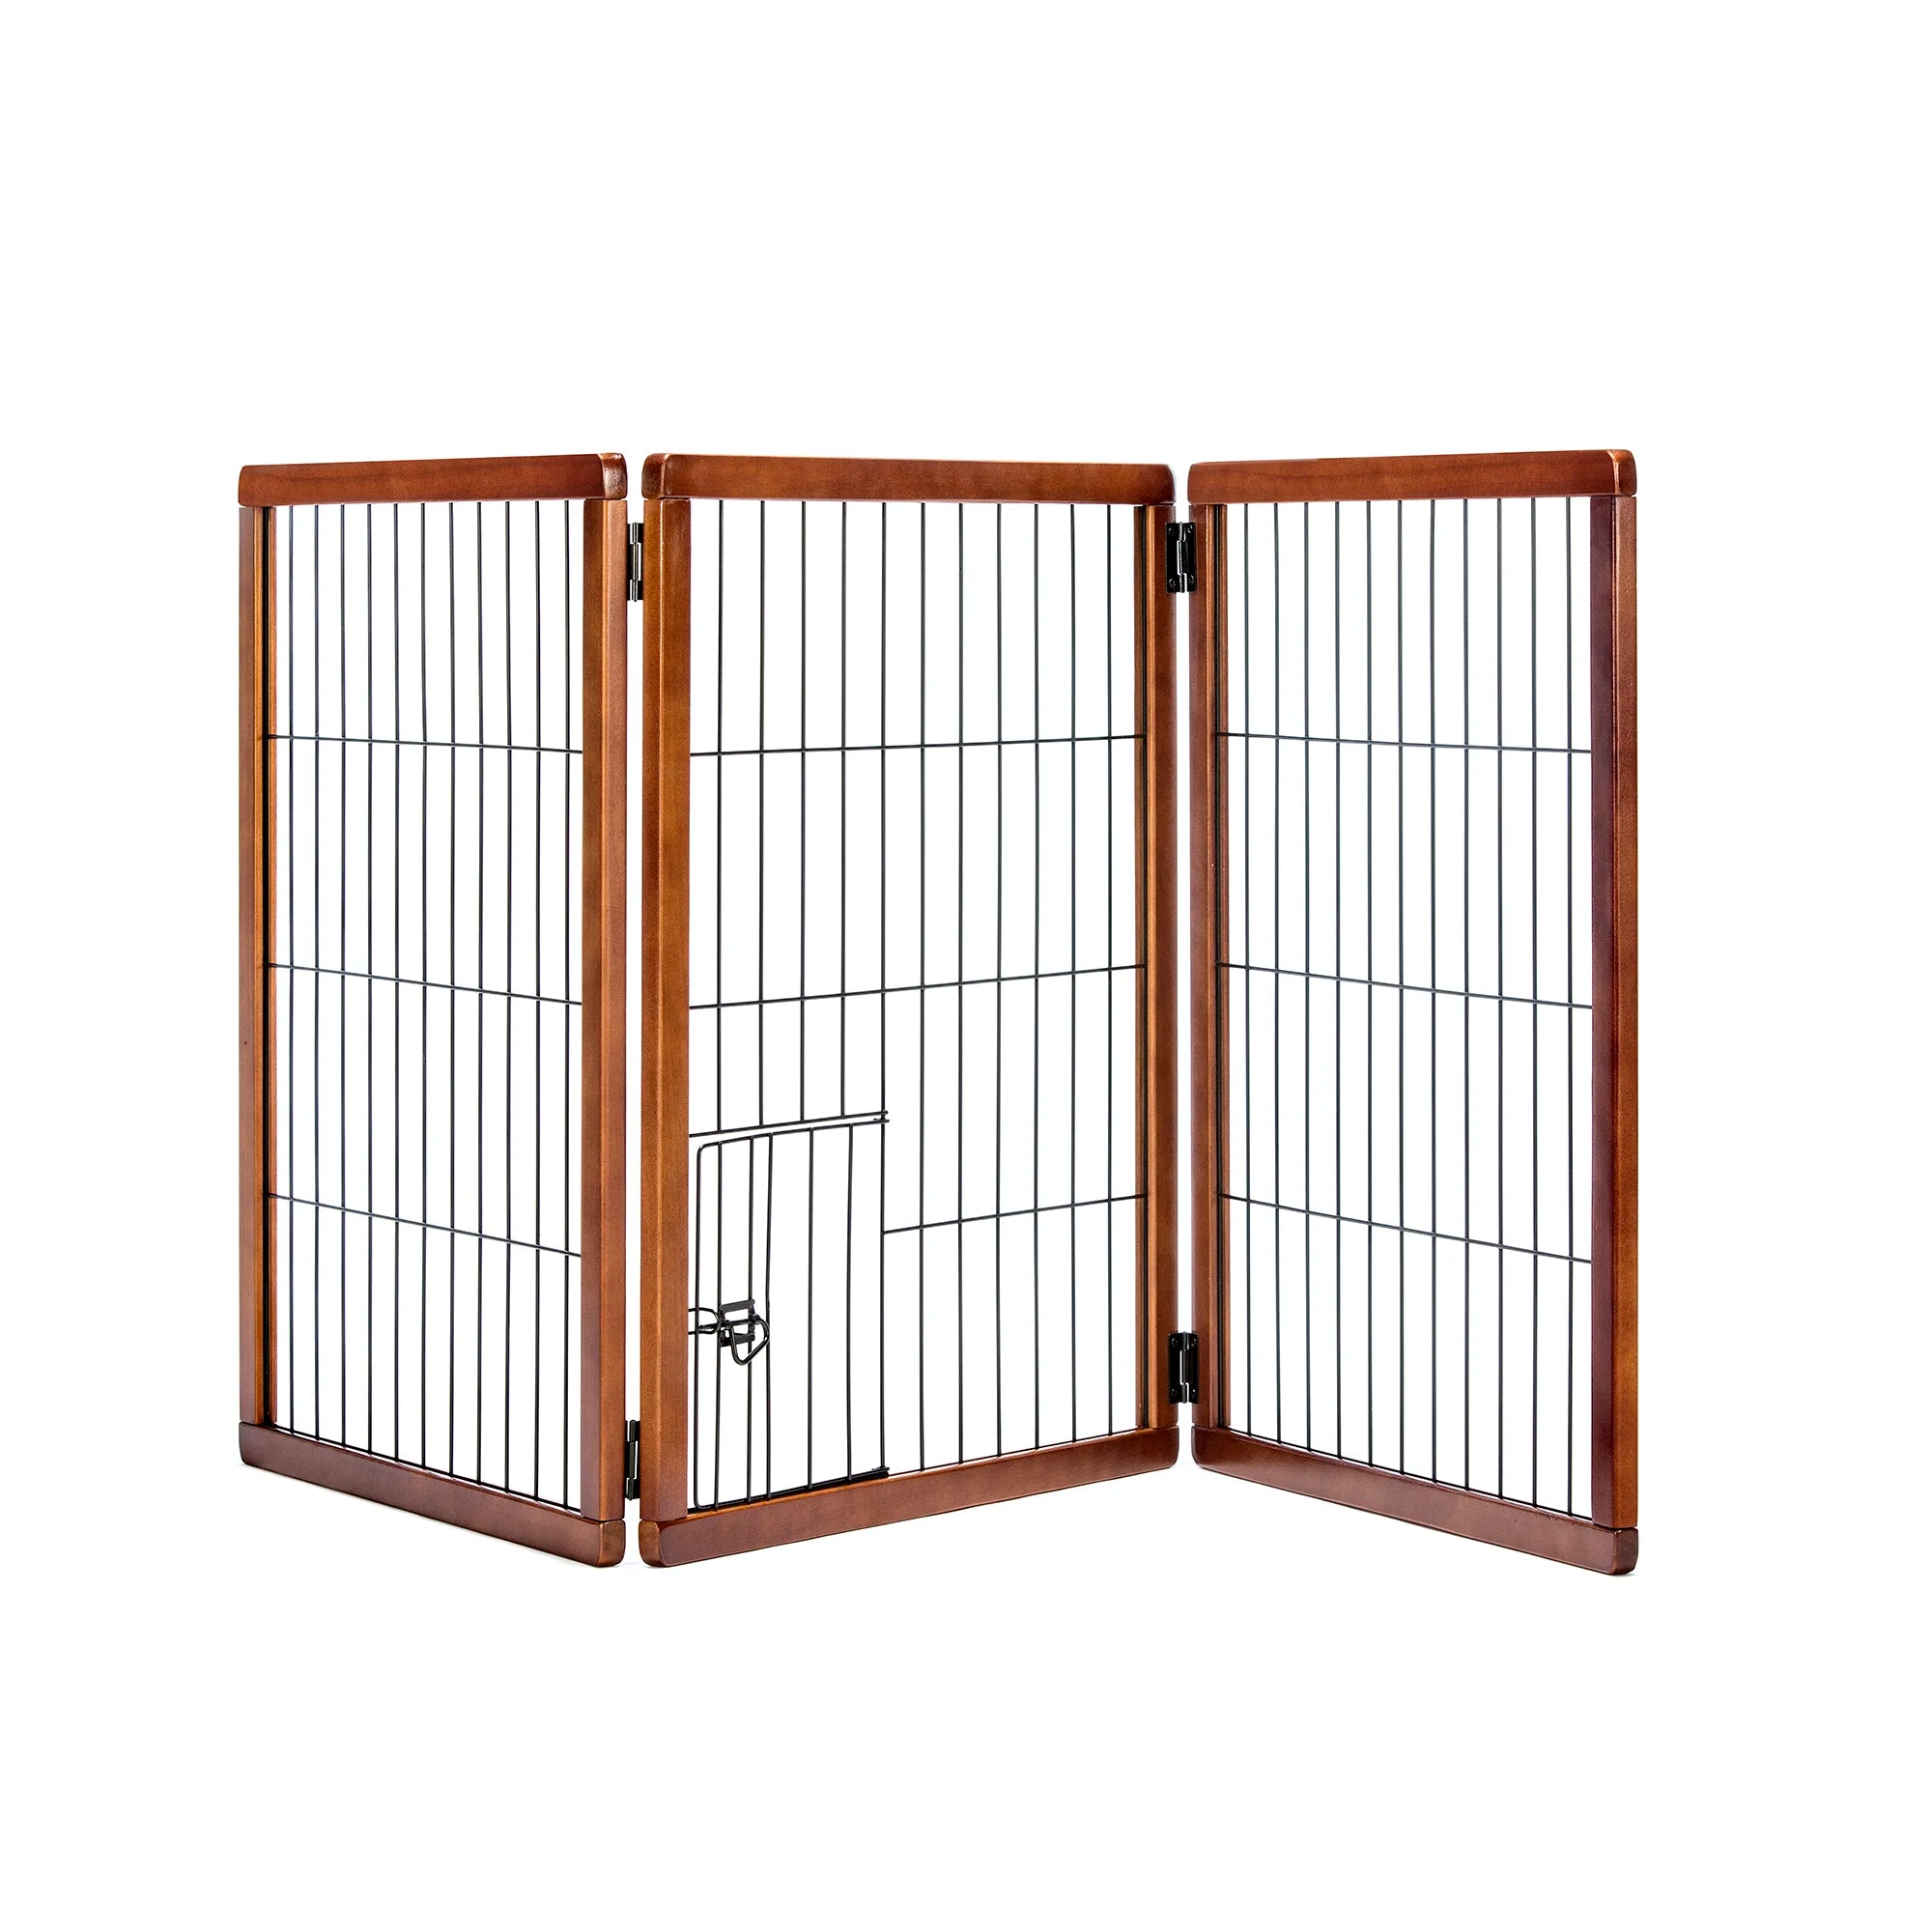 Design Paw Tall 3 Panel Wooden Pet Gate on white background.